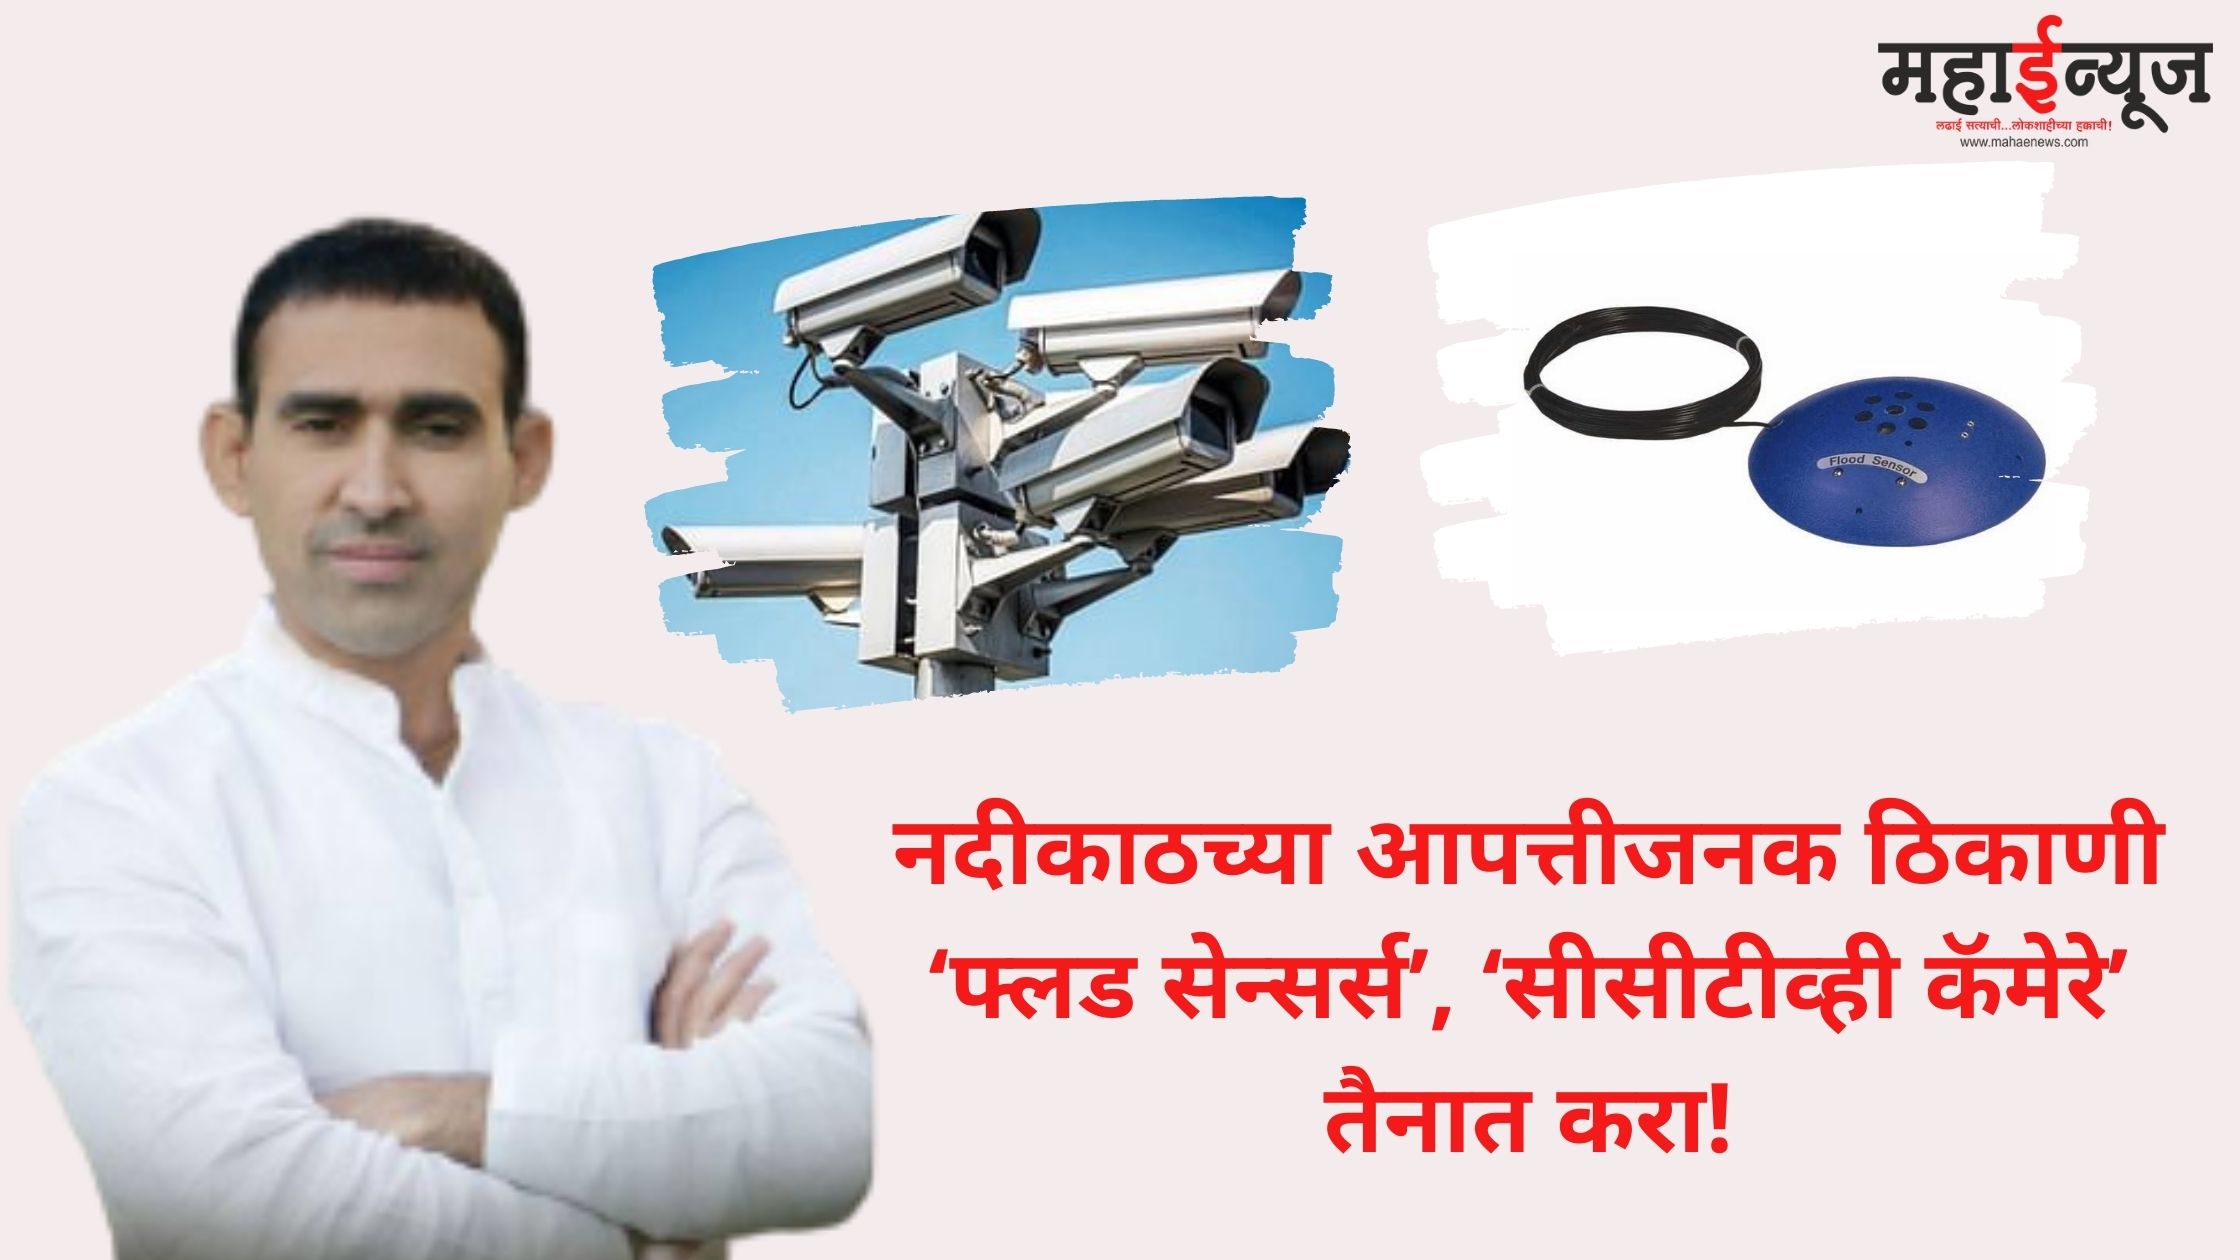 Deploy ‘Flood Sensors’, ‘CCTV Cameras’ in disaster prone areas along the river!